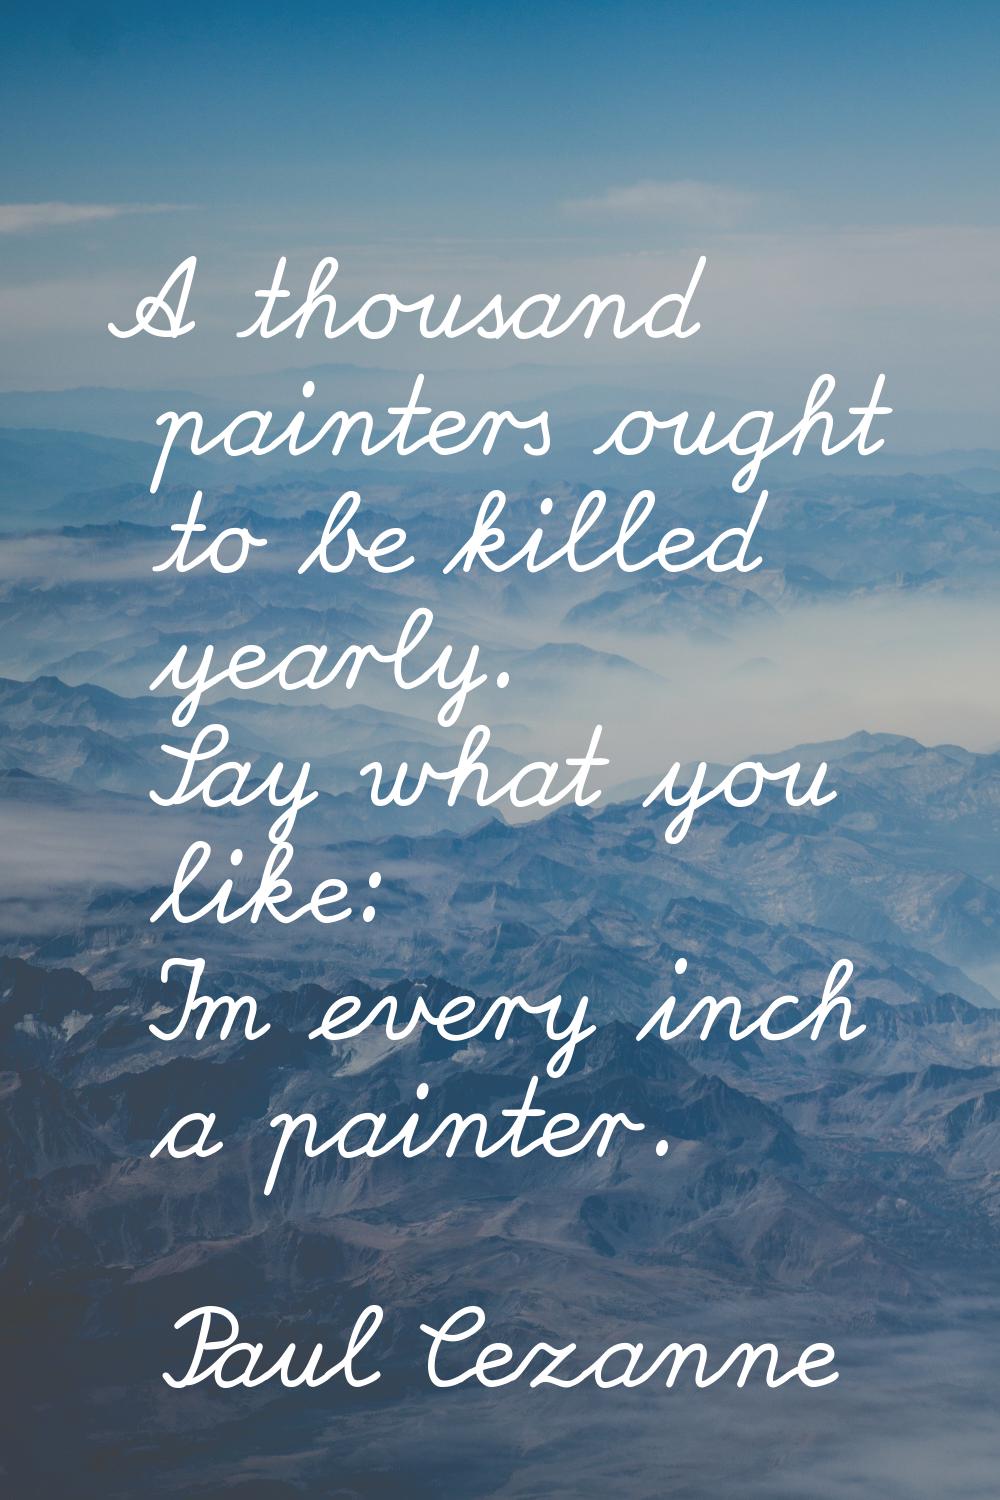 A thousand painters ought to be killed yearly. Say what you like: I'm every inch a painter.